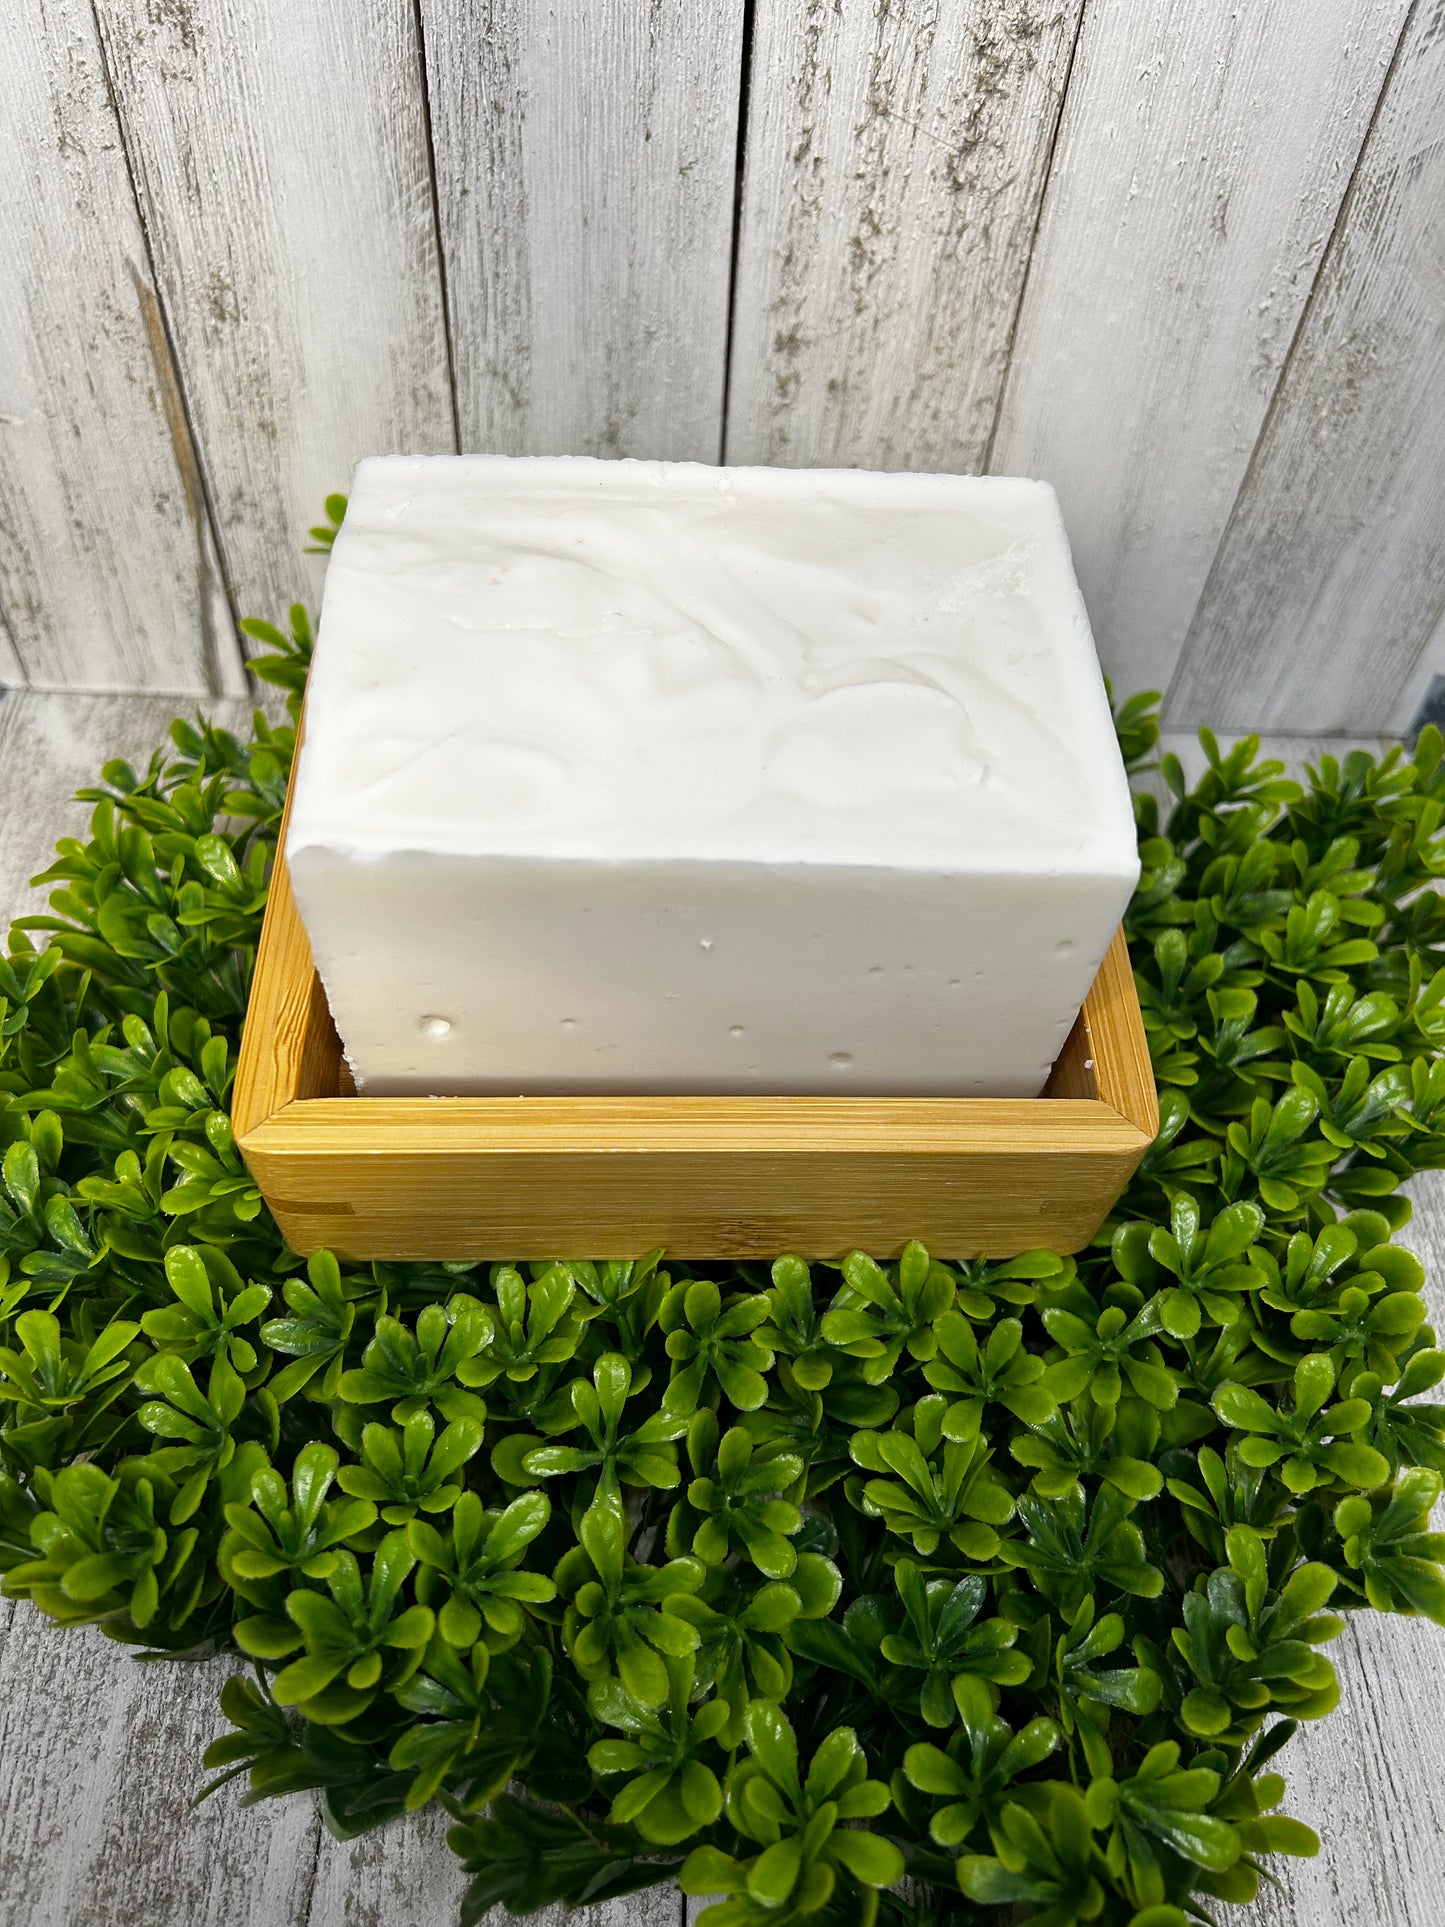 Solid Miracle Dish Bar Soap in Sturdy Bamboo Draining Box